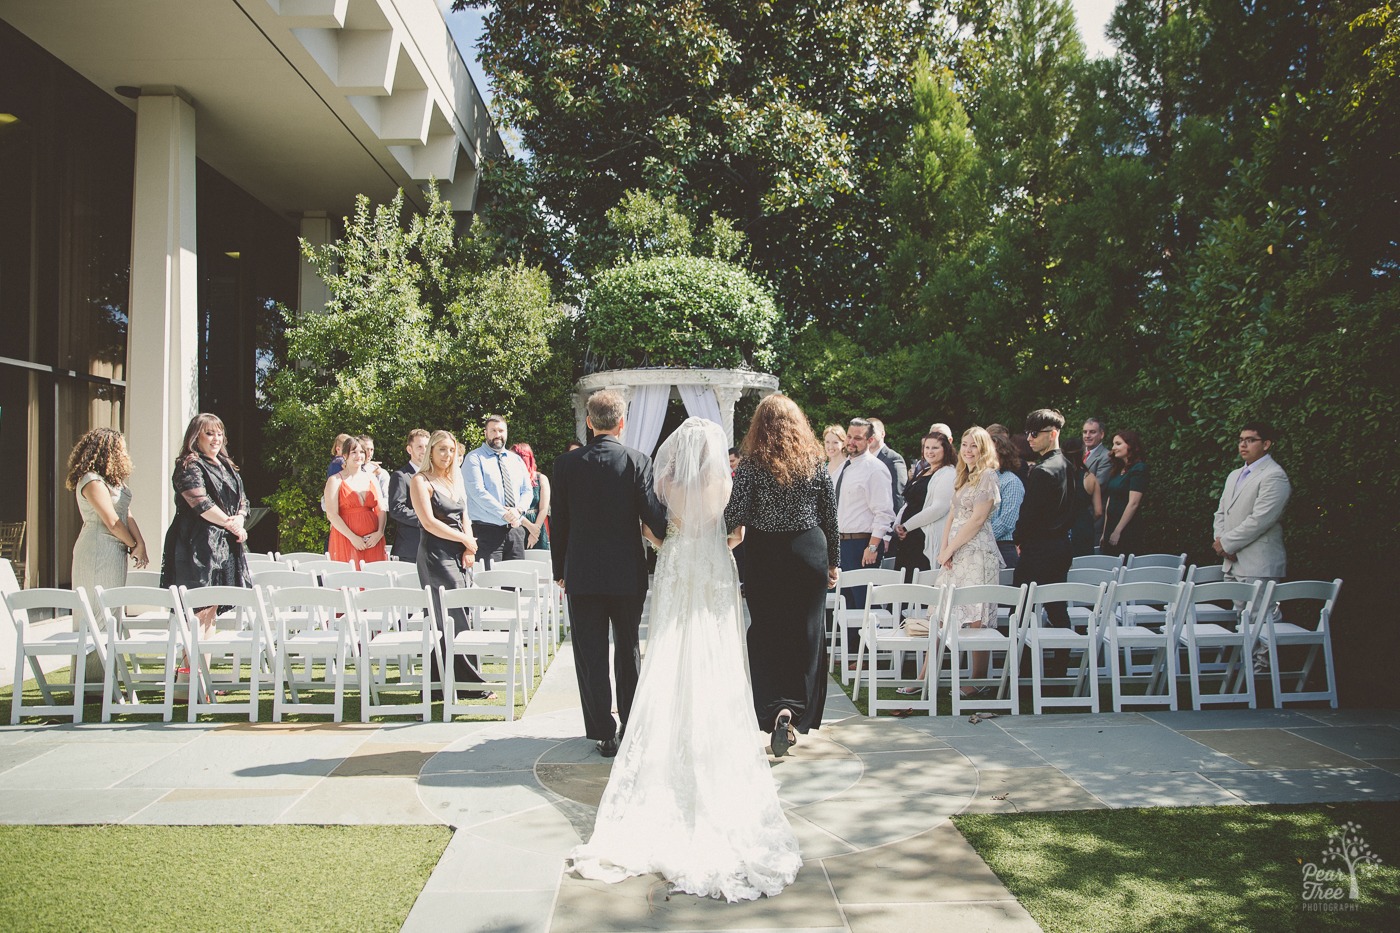 Father and mother walking their daughter down the outdoor wedding aisle at The Atrium in Norcross